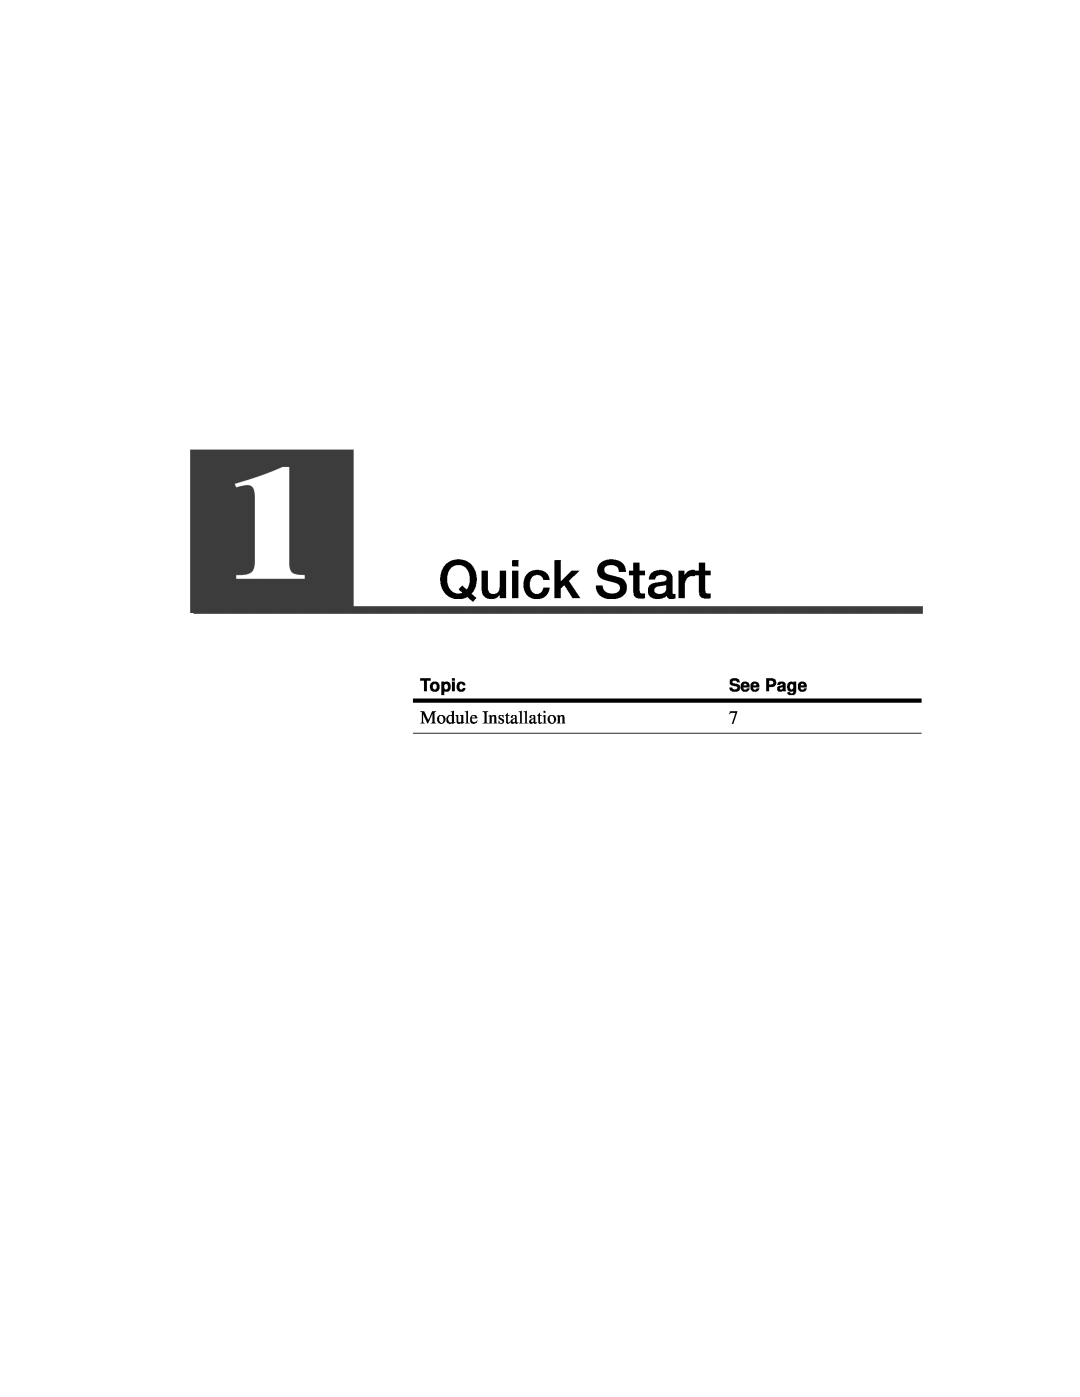 Intel A21721-001 manual Quick Start, Module Installation, Topic, See Page 